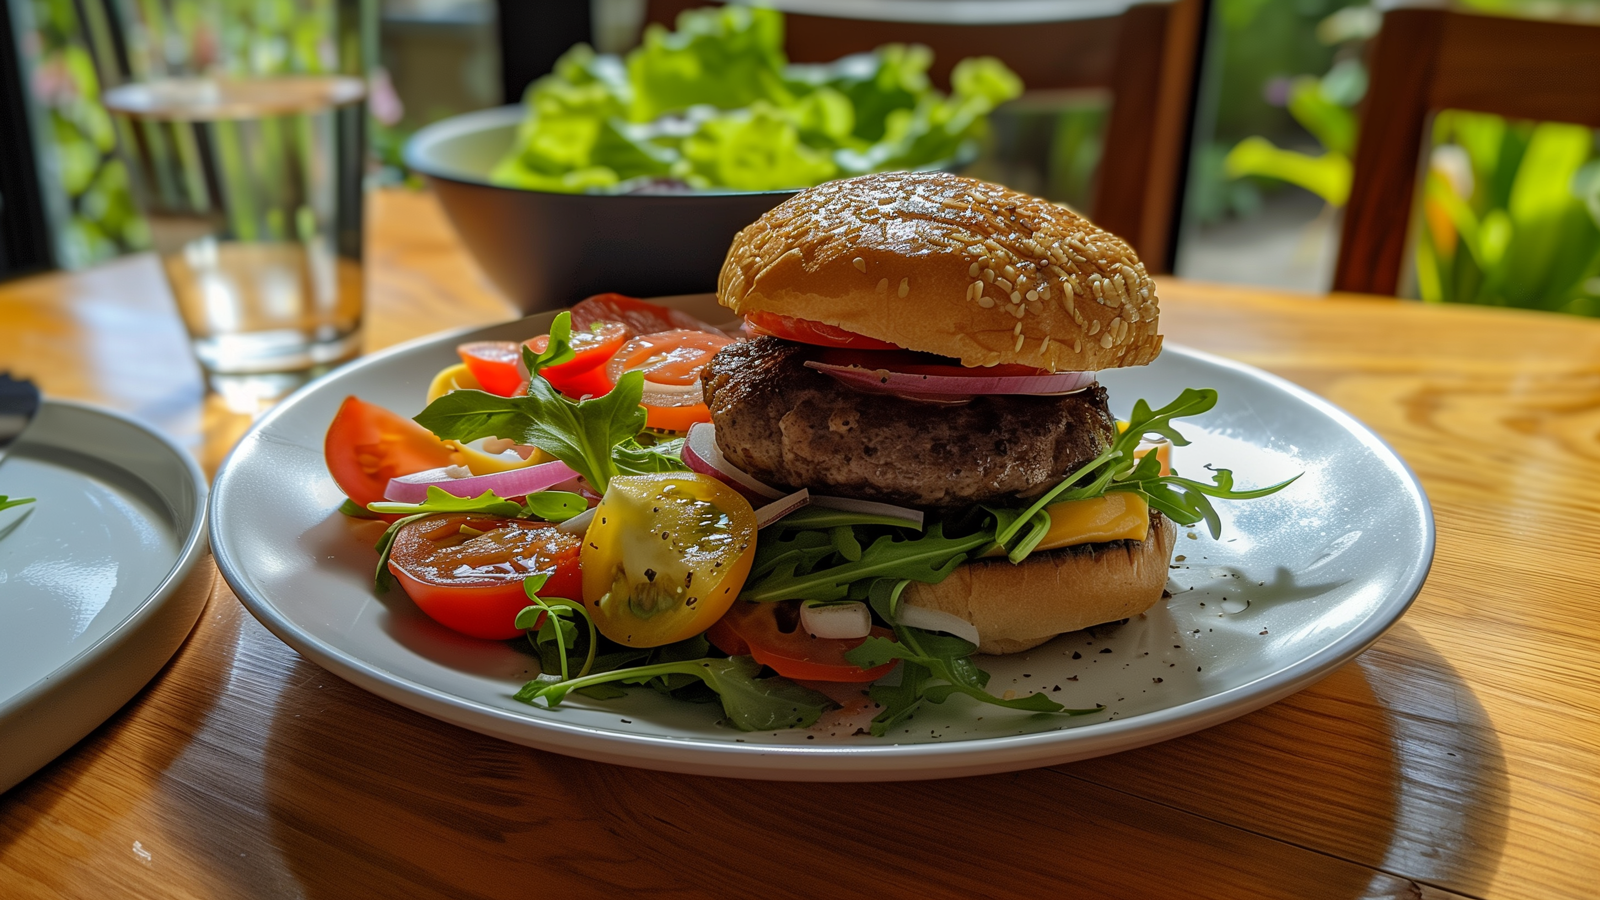 Lab-grown burgers and cricket salads will be the norm by 2054, researchers predict